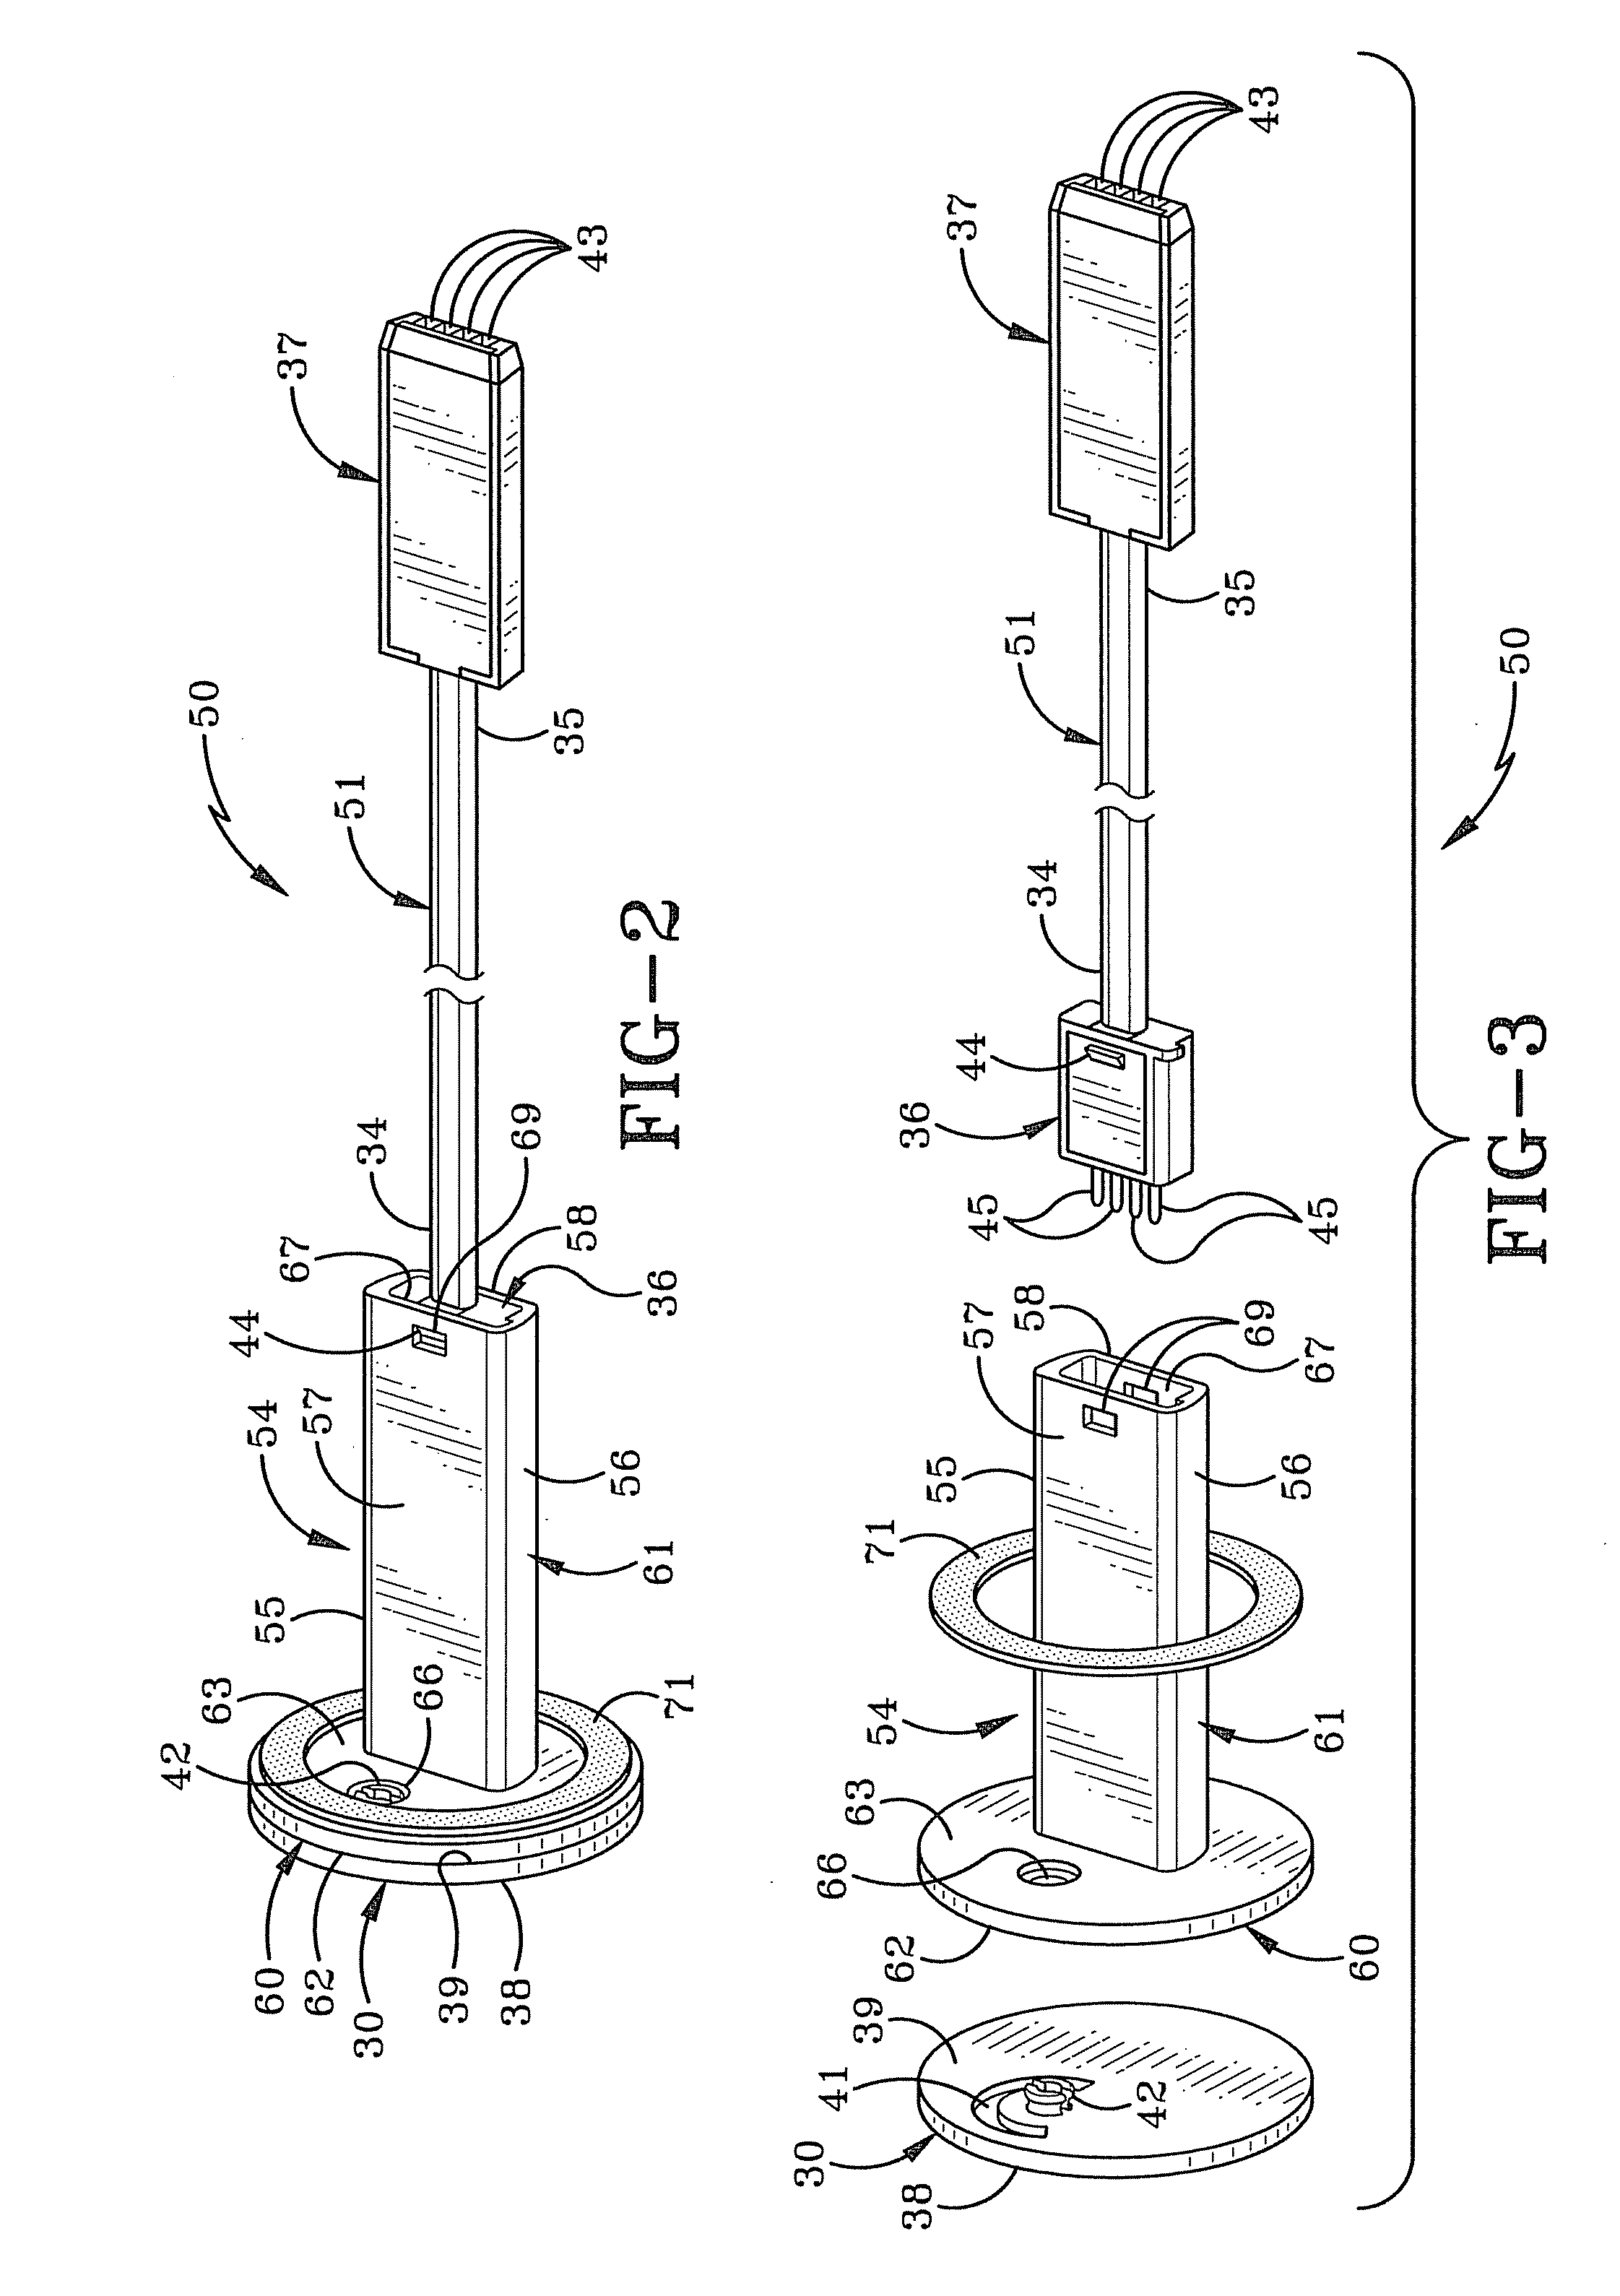 Method and apparatus for deactivating an alarming unit